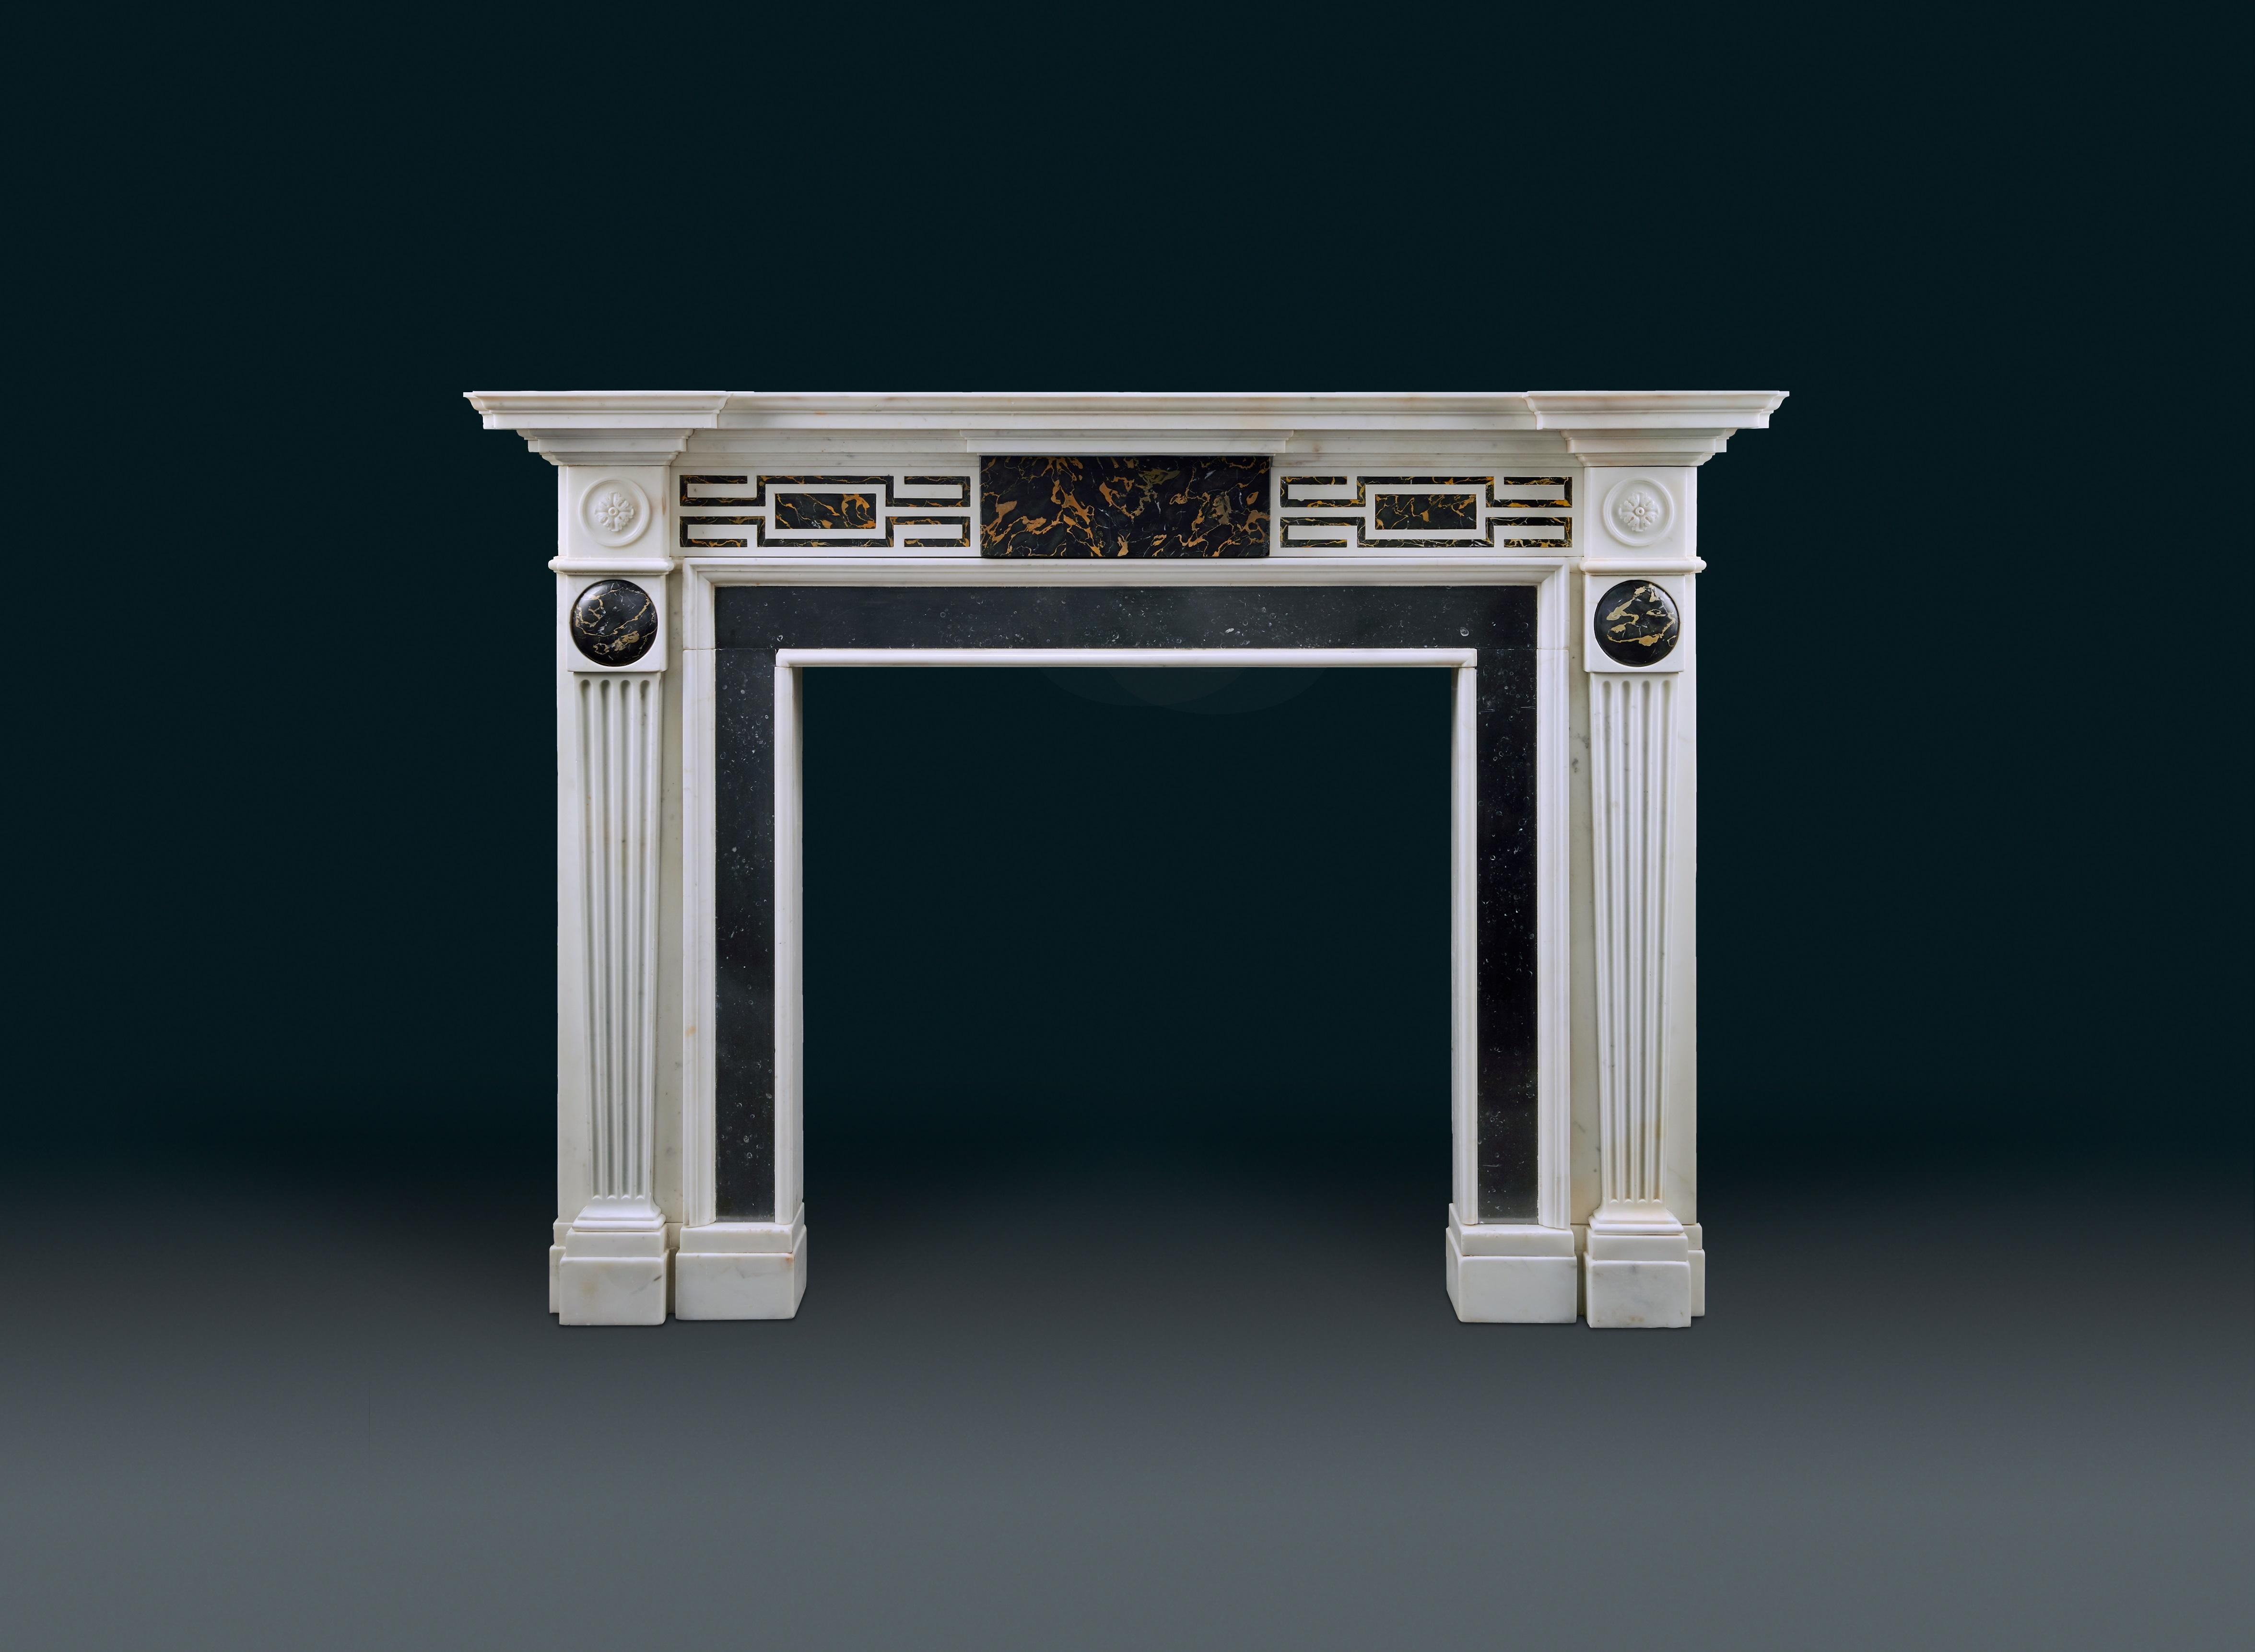 A late 18th century, neoclassical English statuary marble chimneypiece, inlaid with contrasting Portoro Nero marble, circa 1795
With moulded shelf breaking forward and protruding over the jambs. The frieze is centred with a tablet of choice specimen